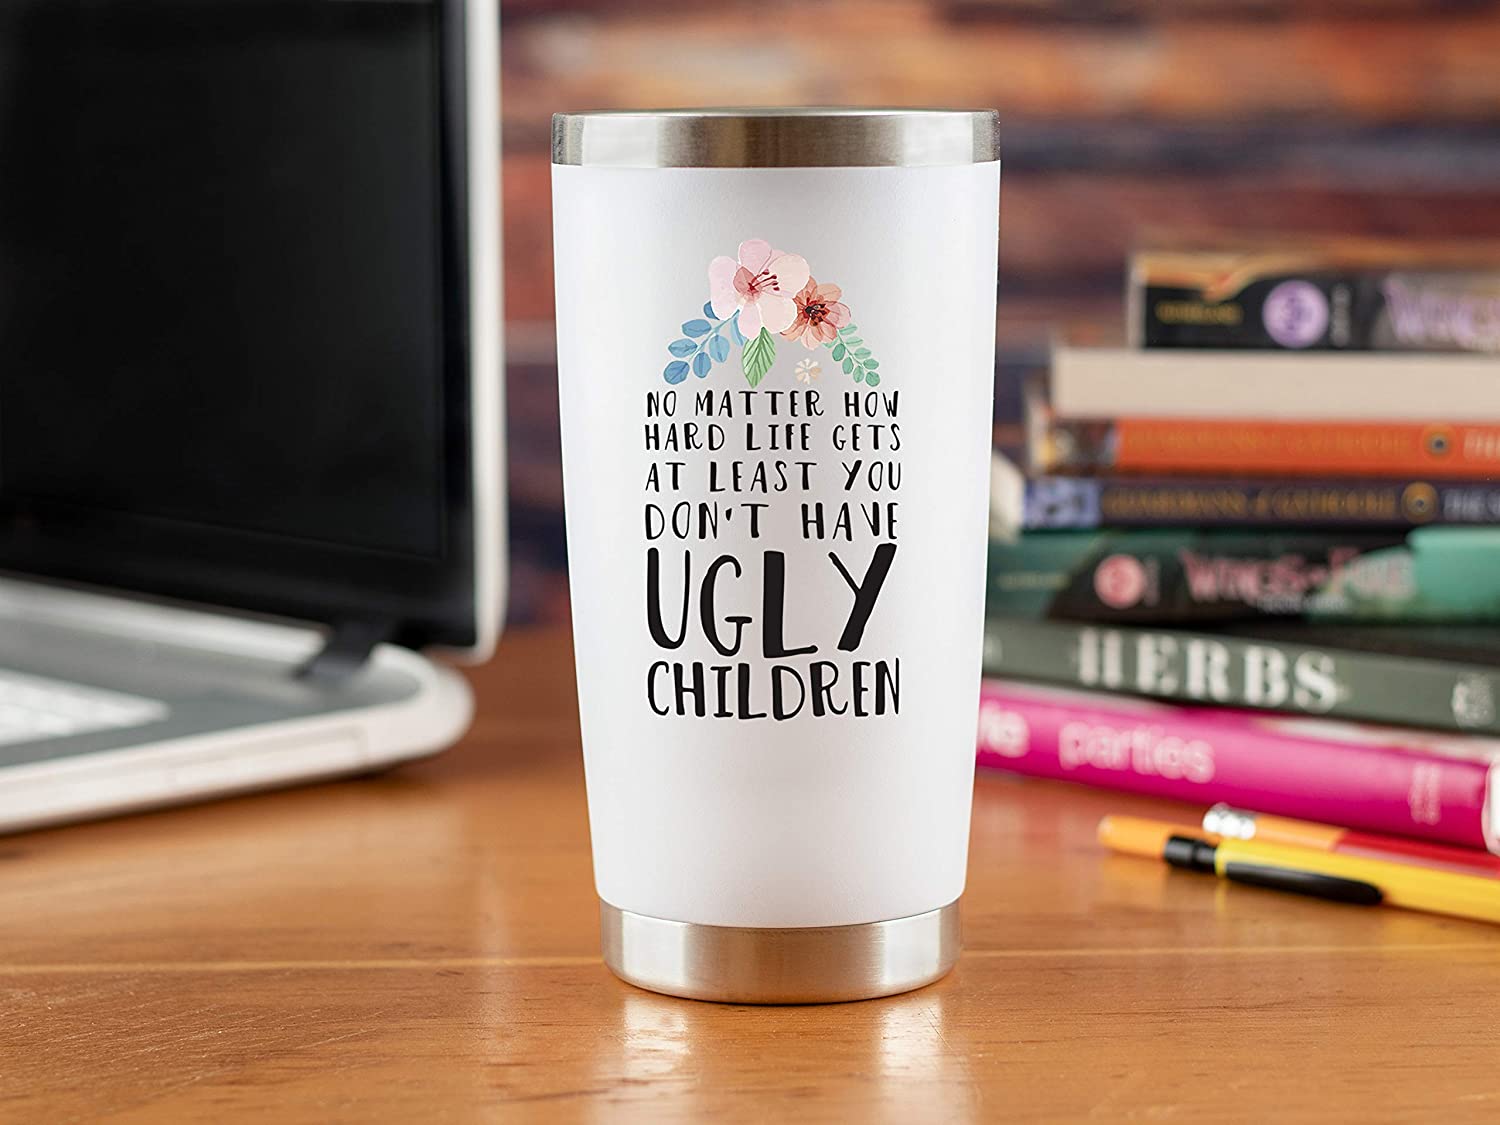 Funny Coffee Mug Christmas Gifts for Moms Grandma Wife Sister Aunt Friends No Matter How Hard Life Gets At Least You Don’t Have Ugly Children Mom Birthday Gifts from Daughter Son Mothers Day Gifts 